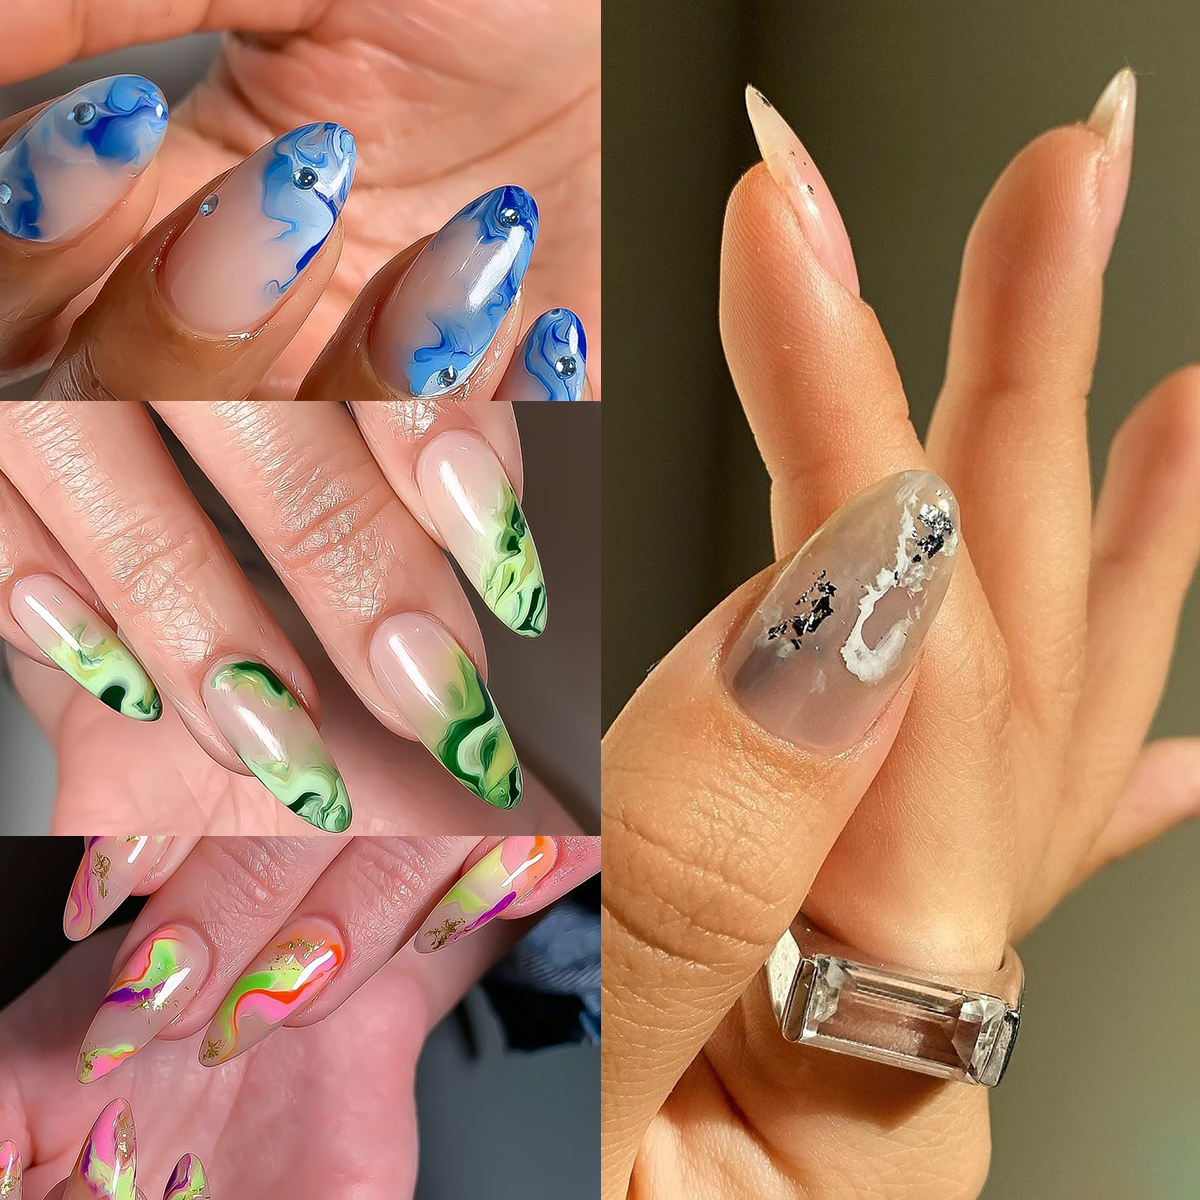 Doris Nails Announces the Release of a New Set of Nail Designs Videos  Specifically for Easter and Invites for Nails Trend Membership – ABNewswire